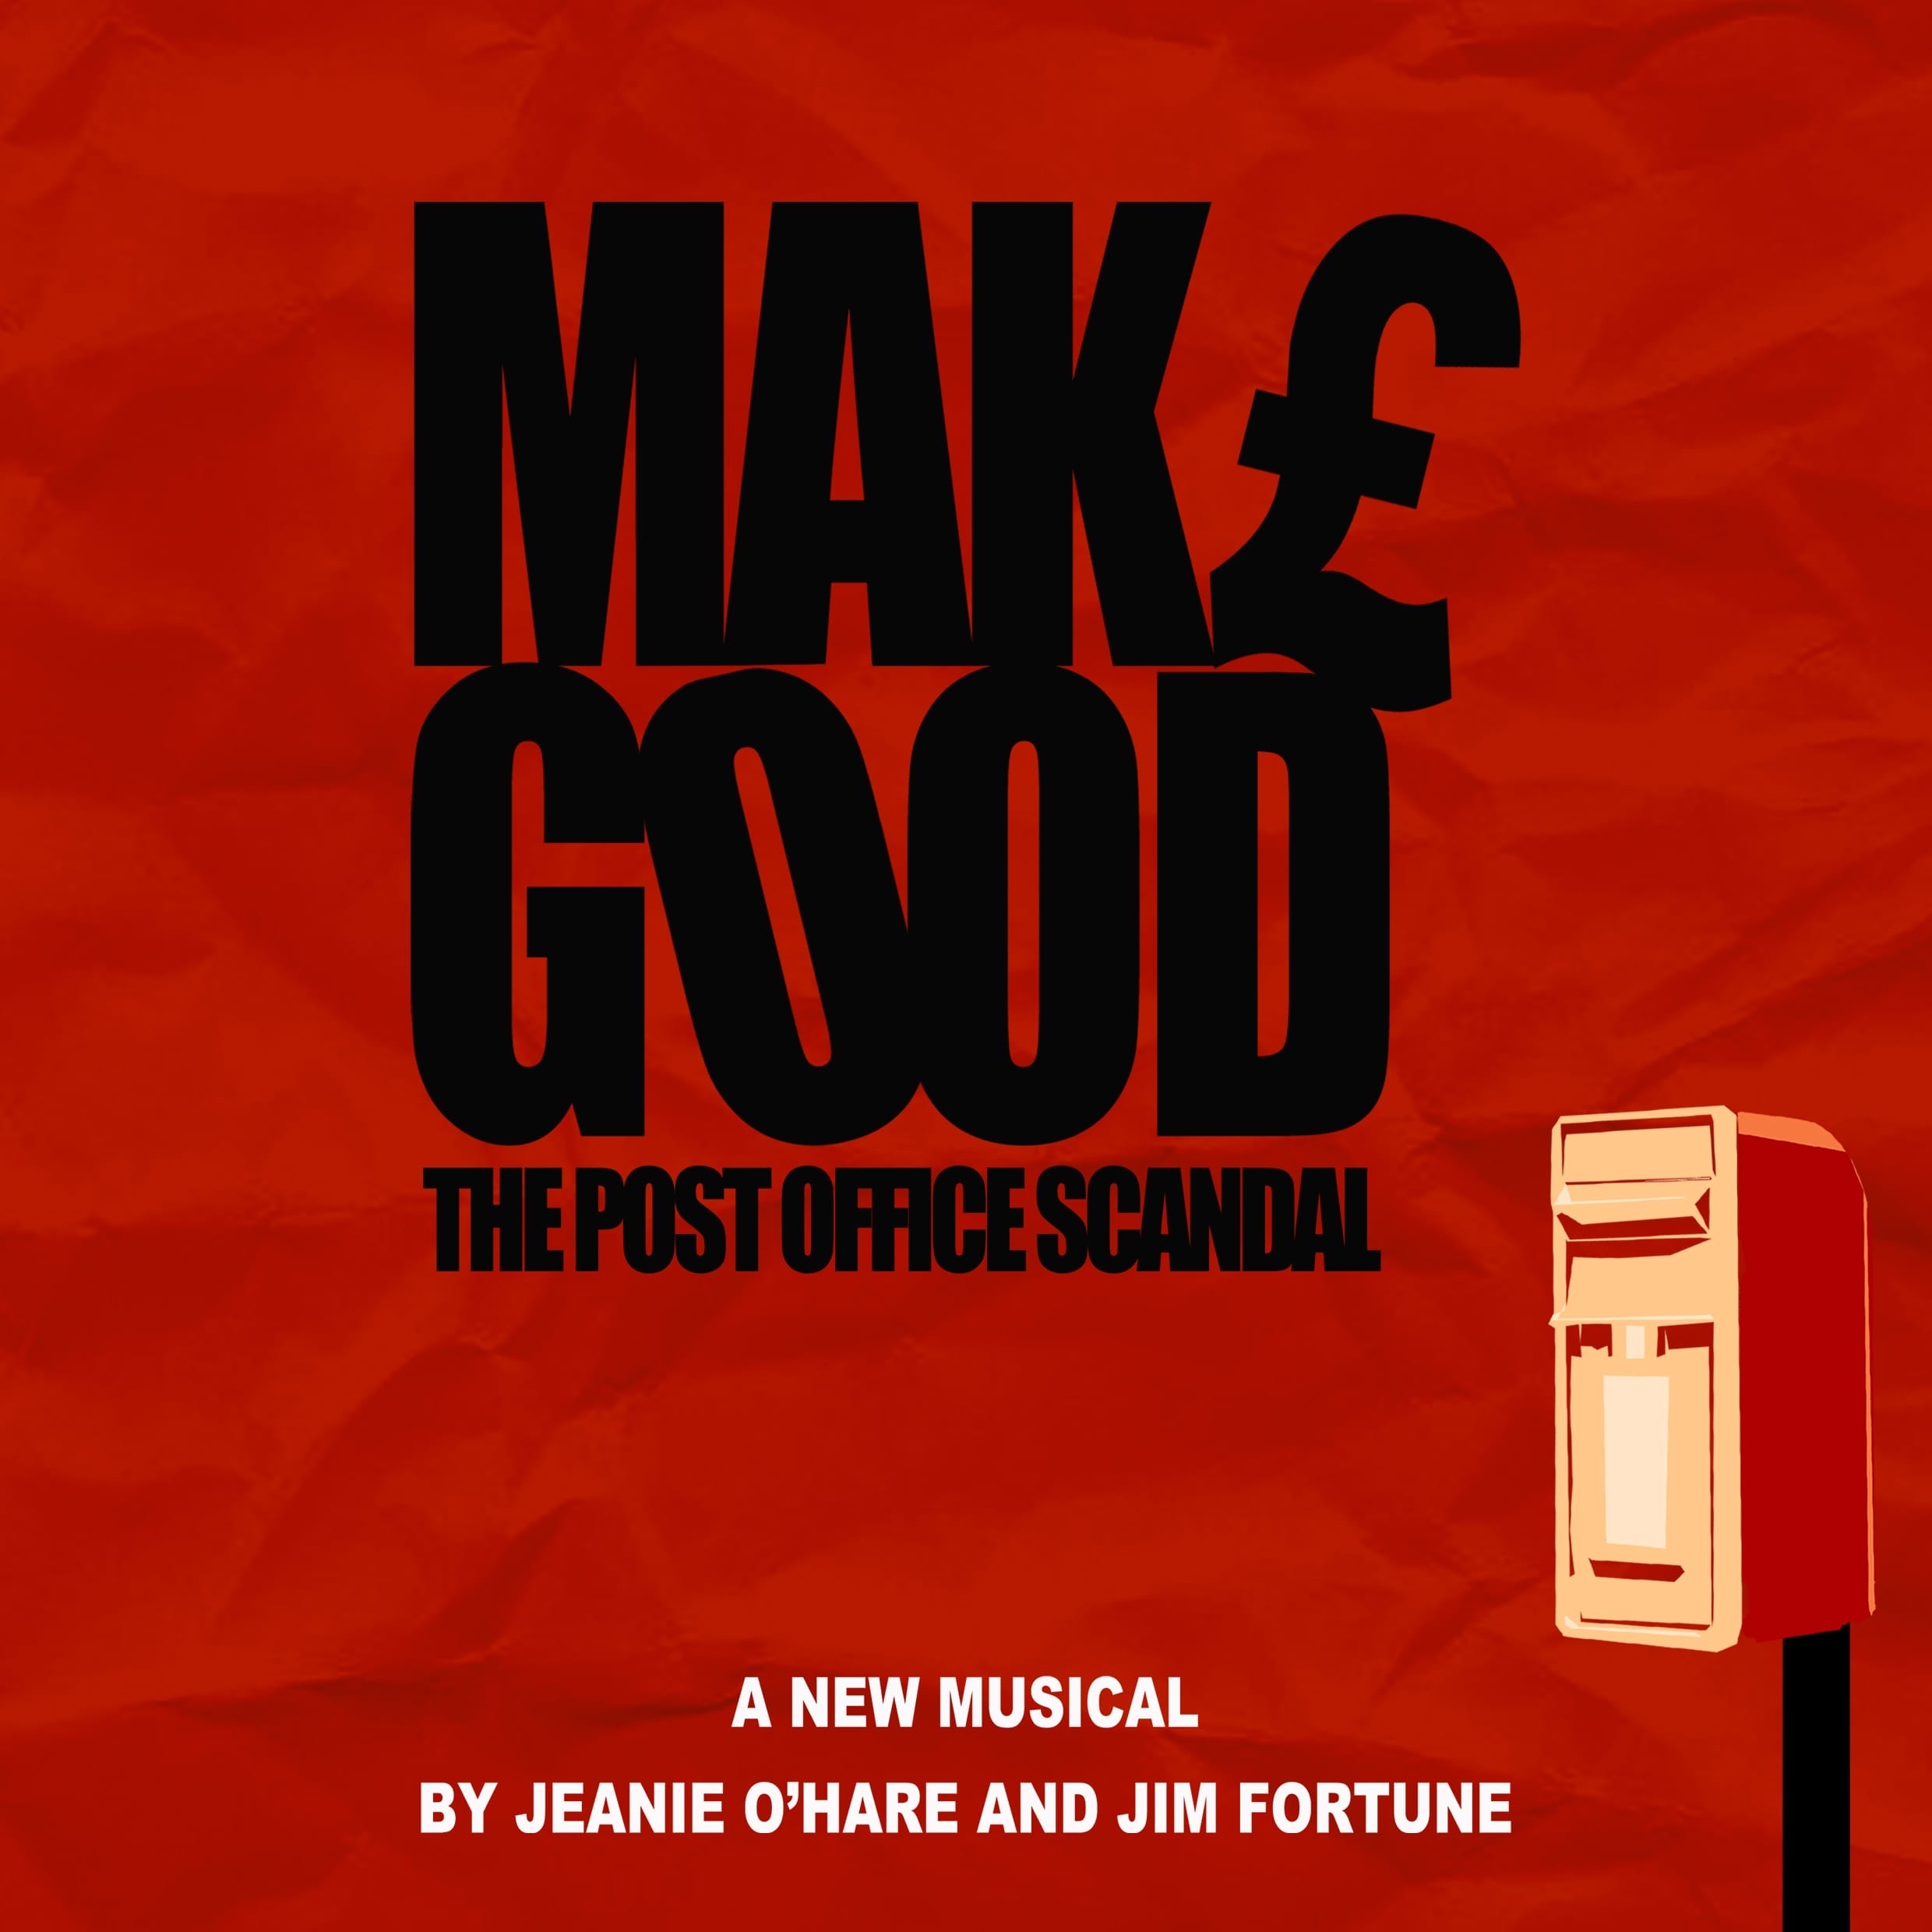 A red background featuring black text - Make Good The Post Office Scandal and an illustration of a post box